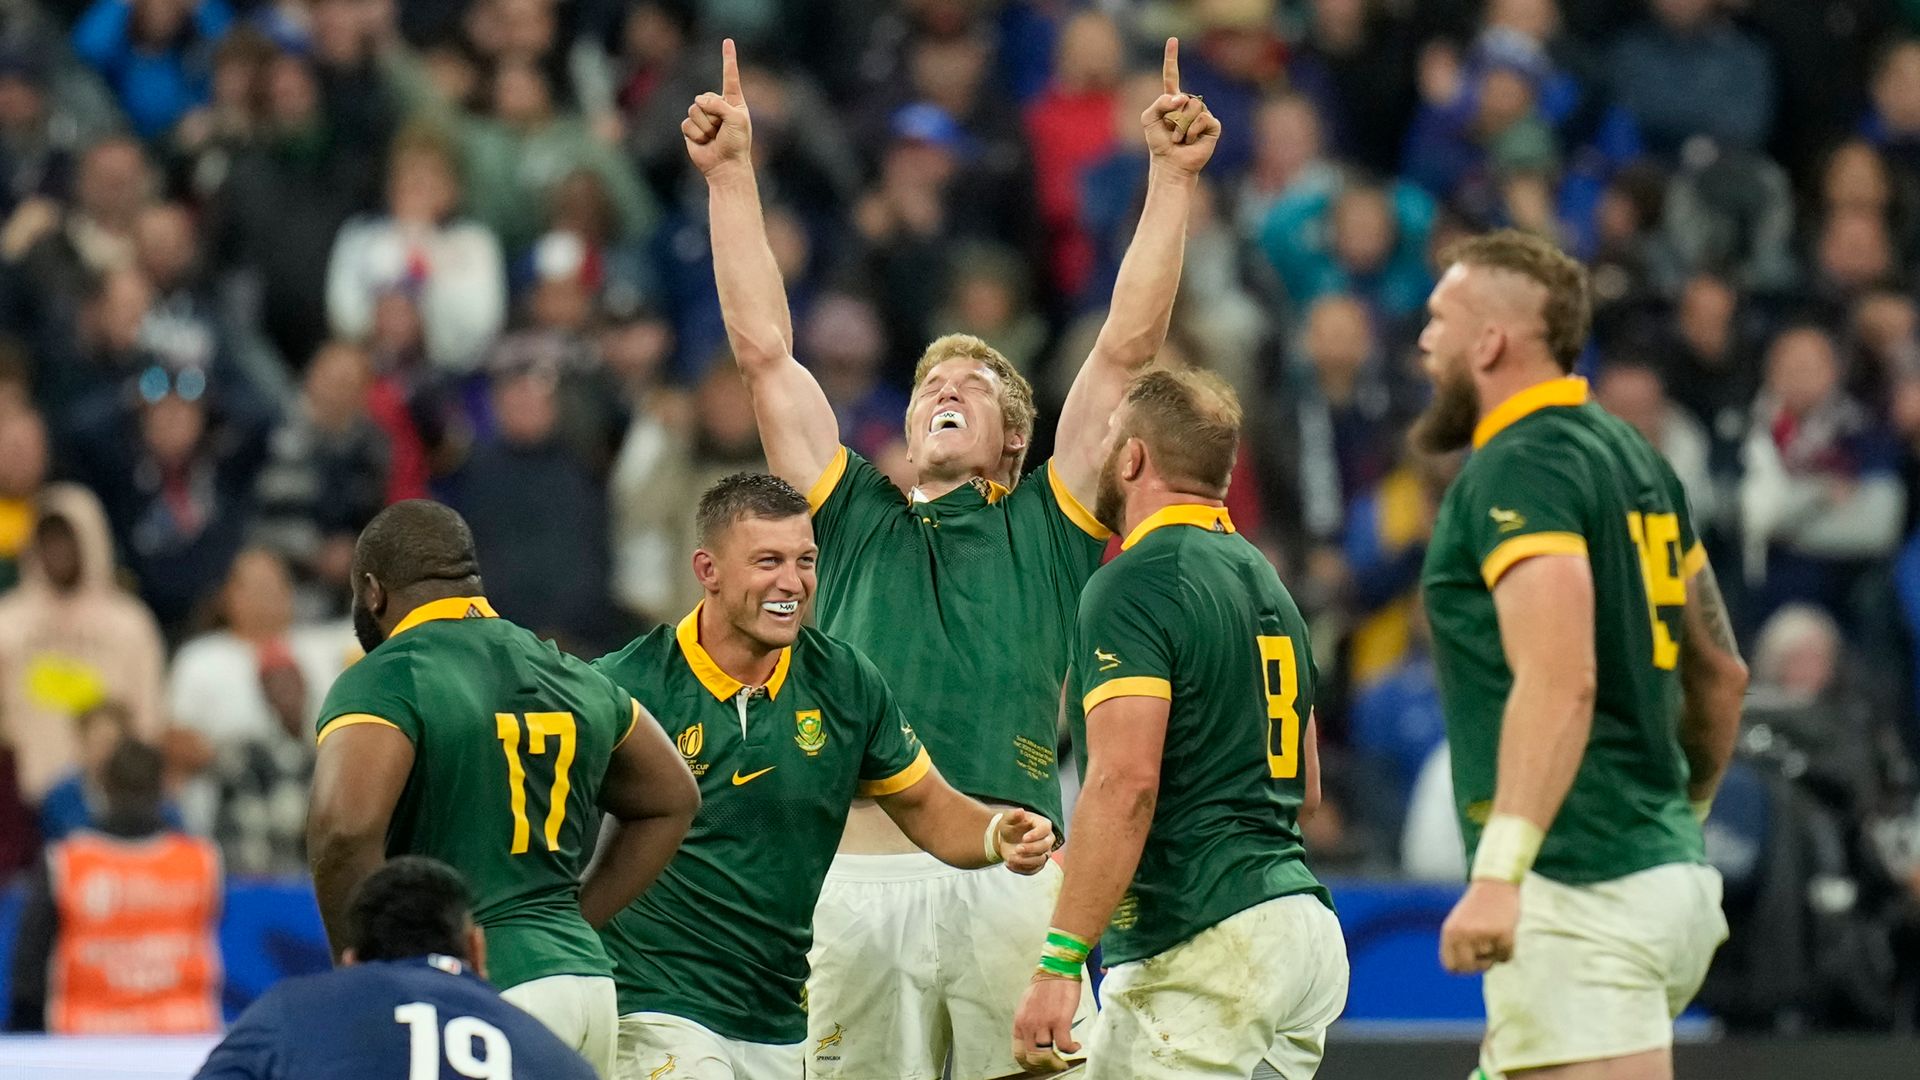 RWC quarter-finals: South Africa edge France in titanic tussle - as it happened